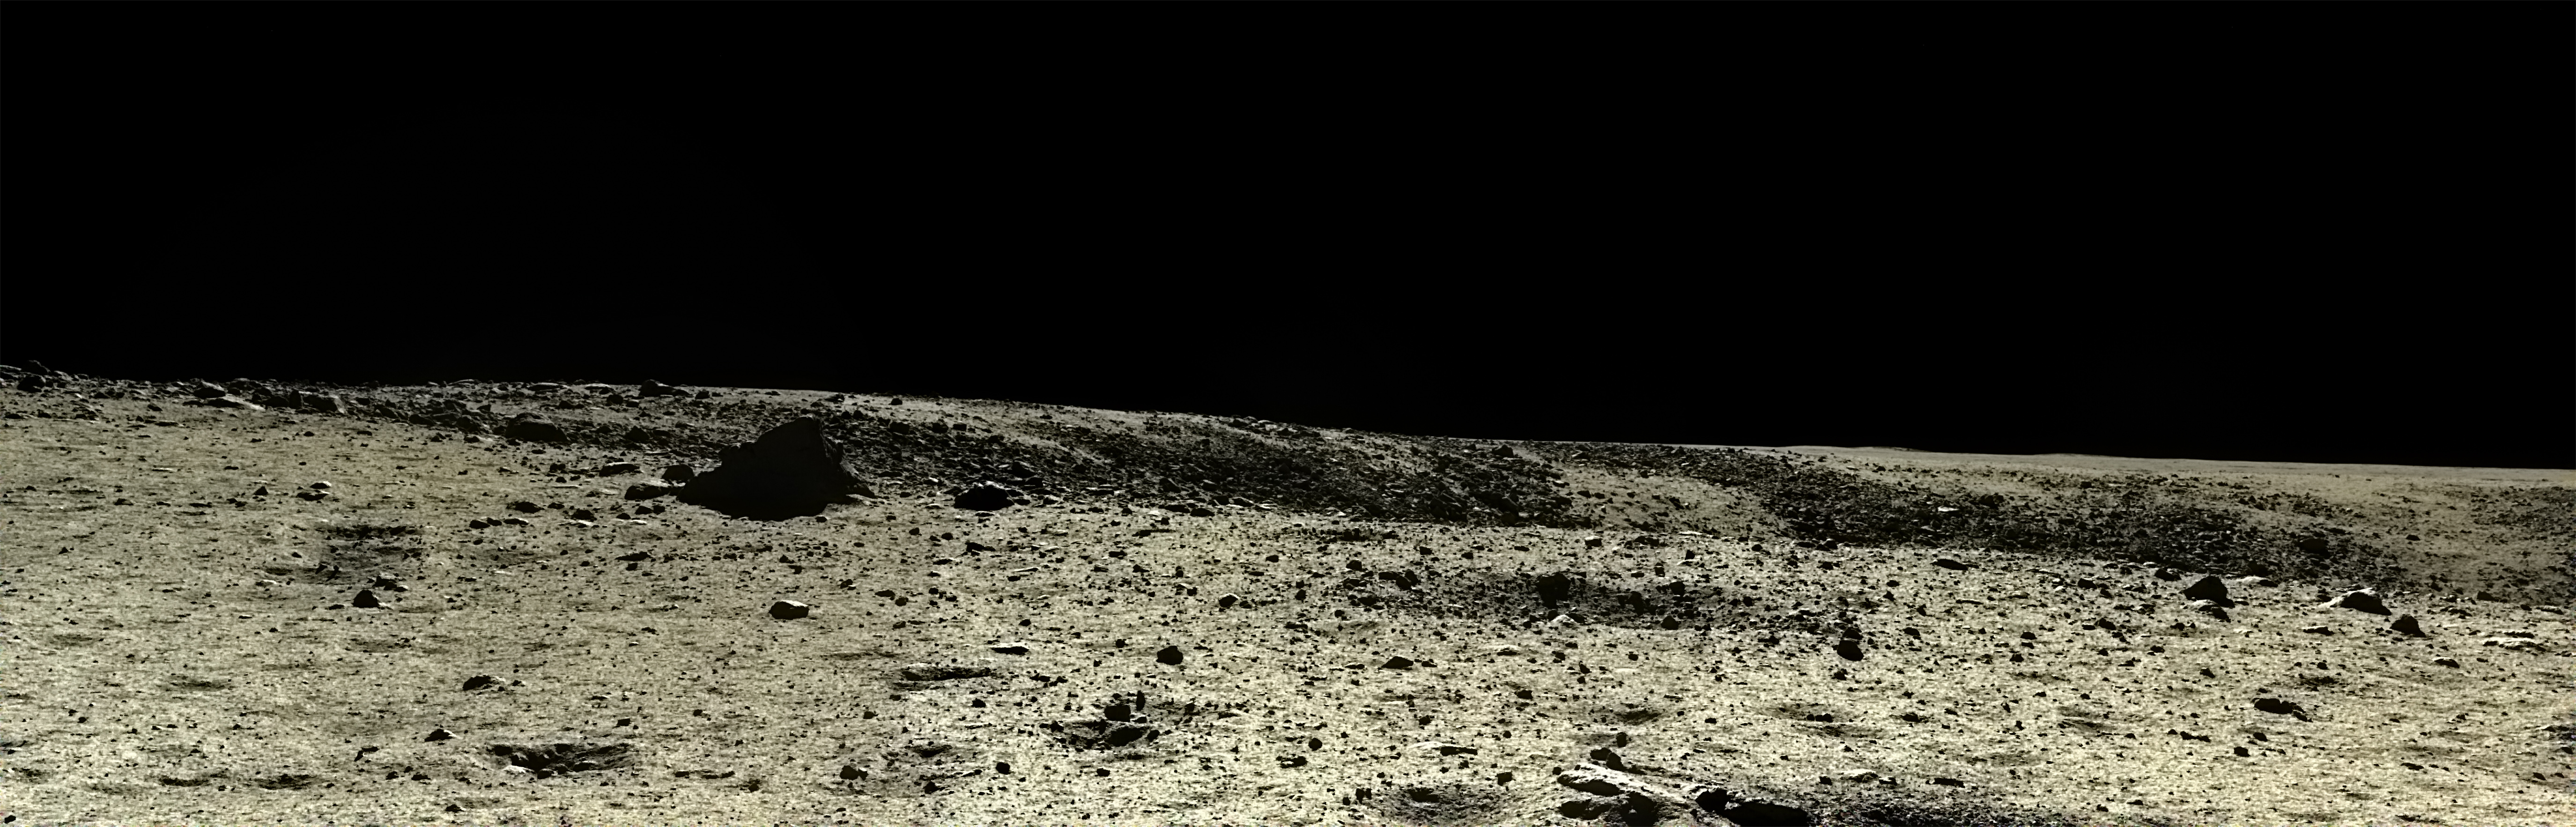 Panoramic view of the Moon - Chinese lander